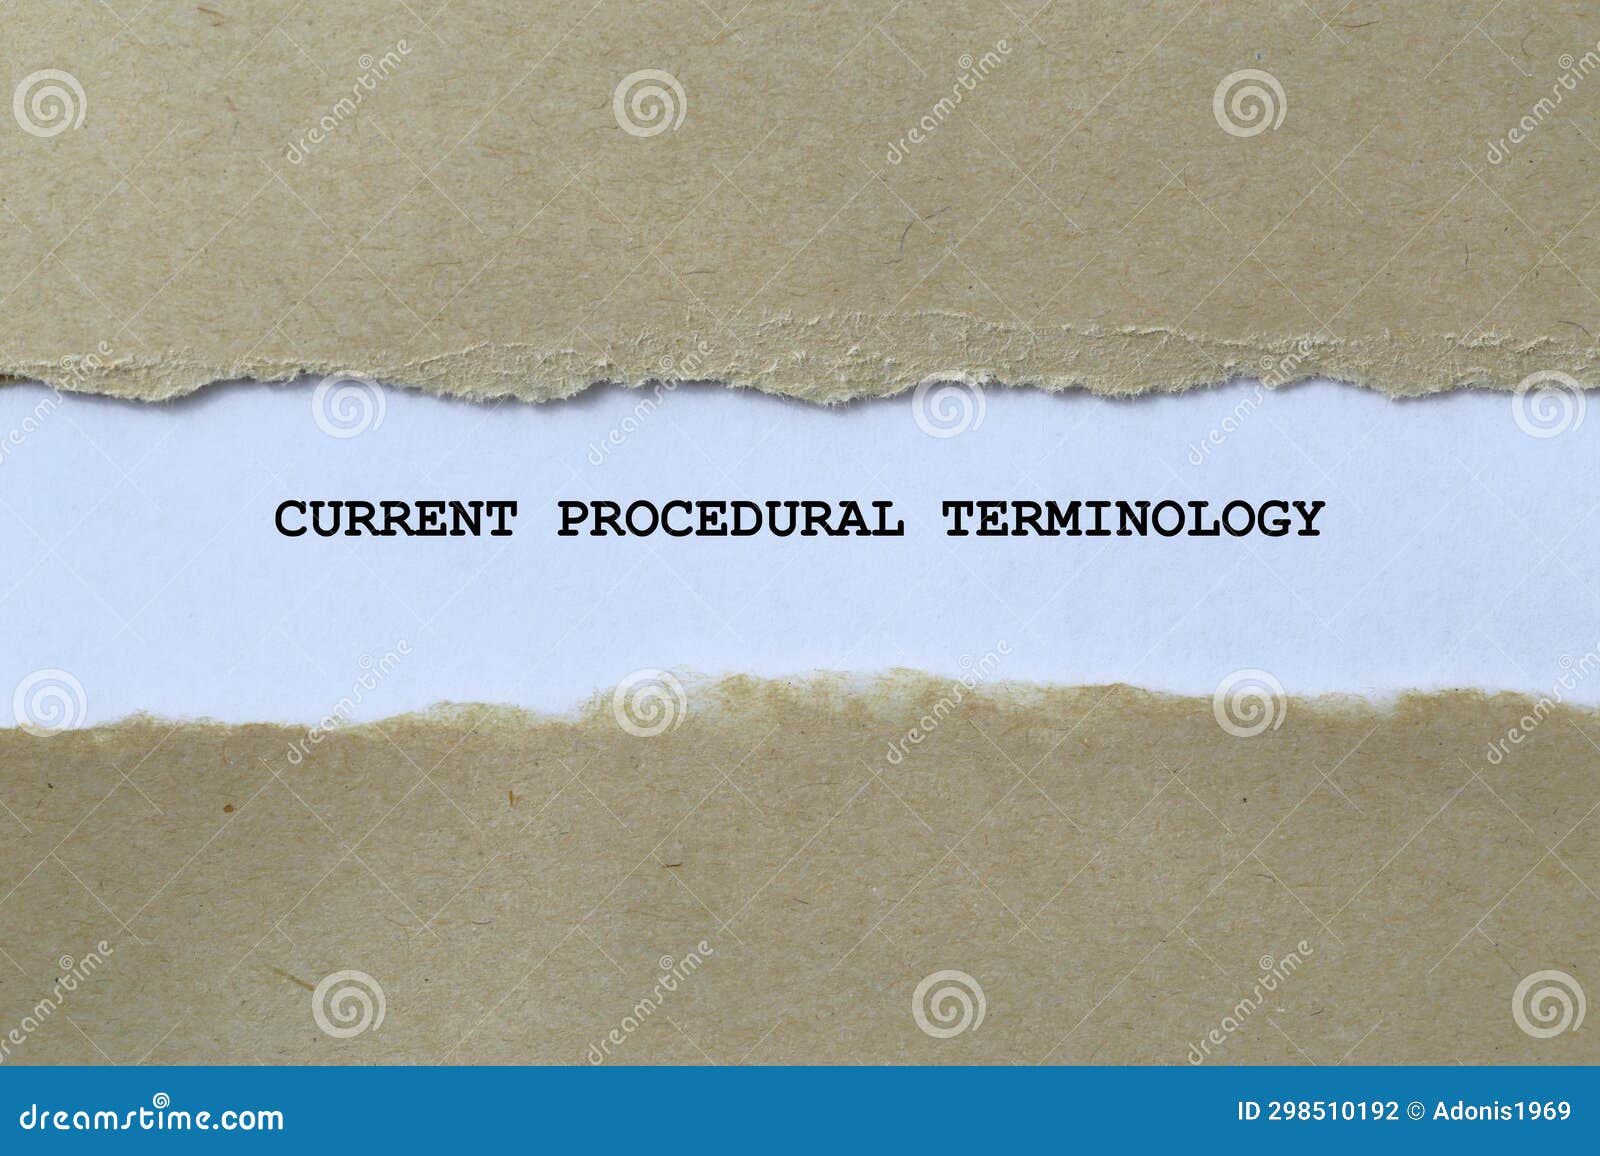 current procedural terminology on white paper